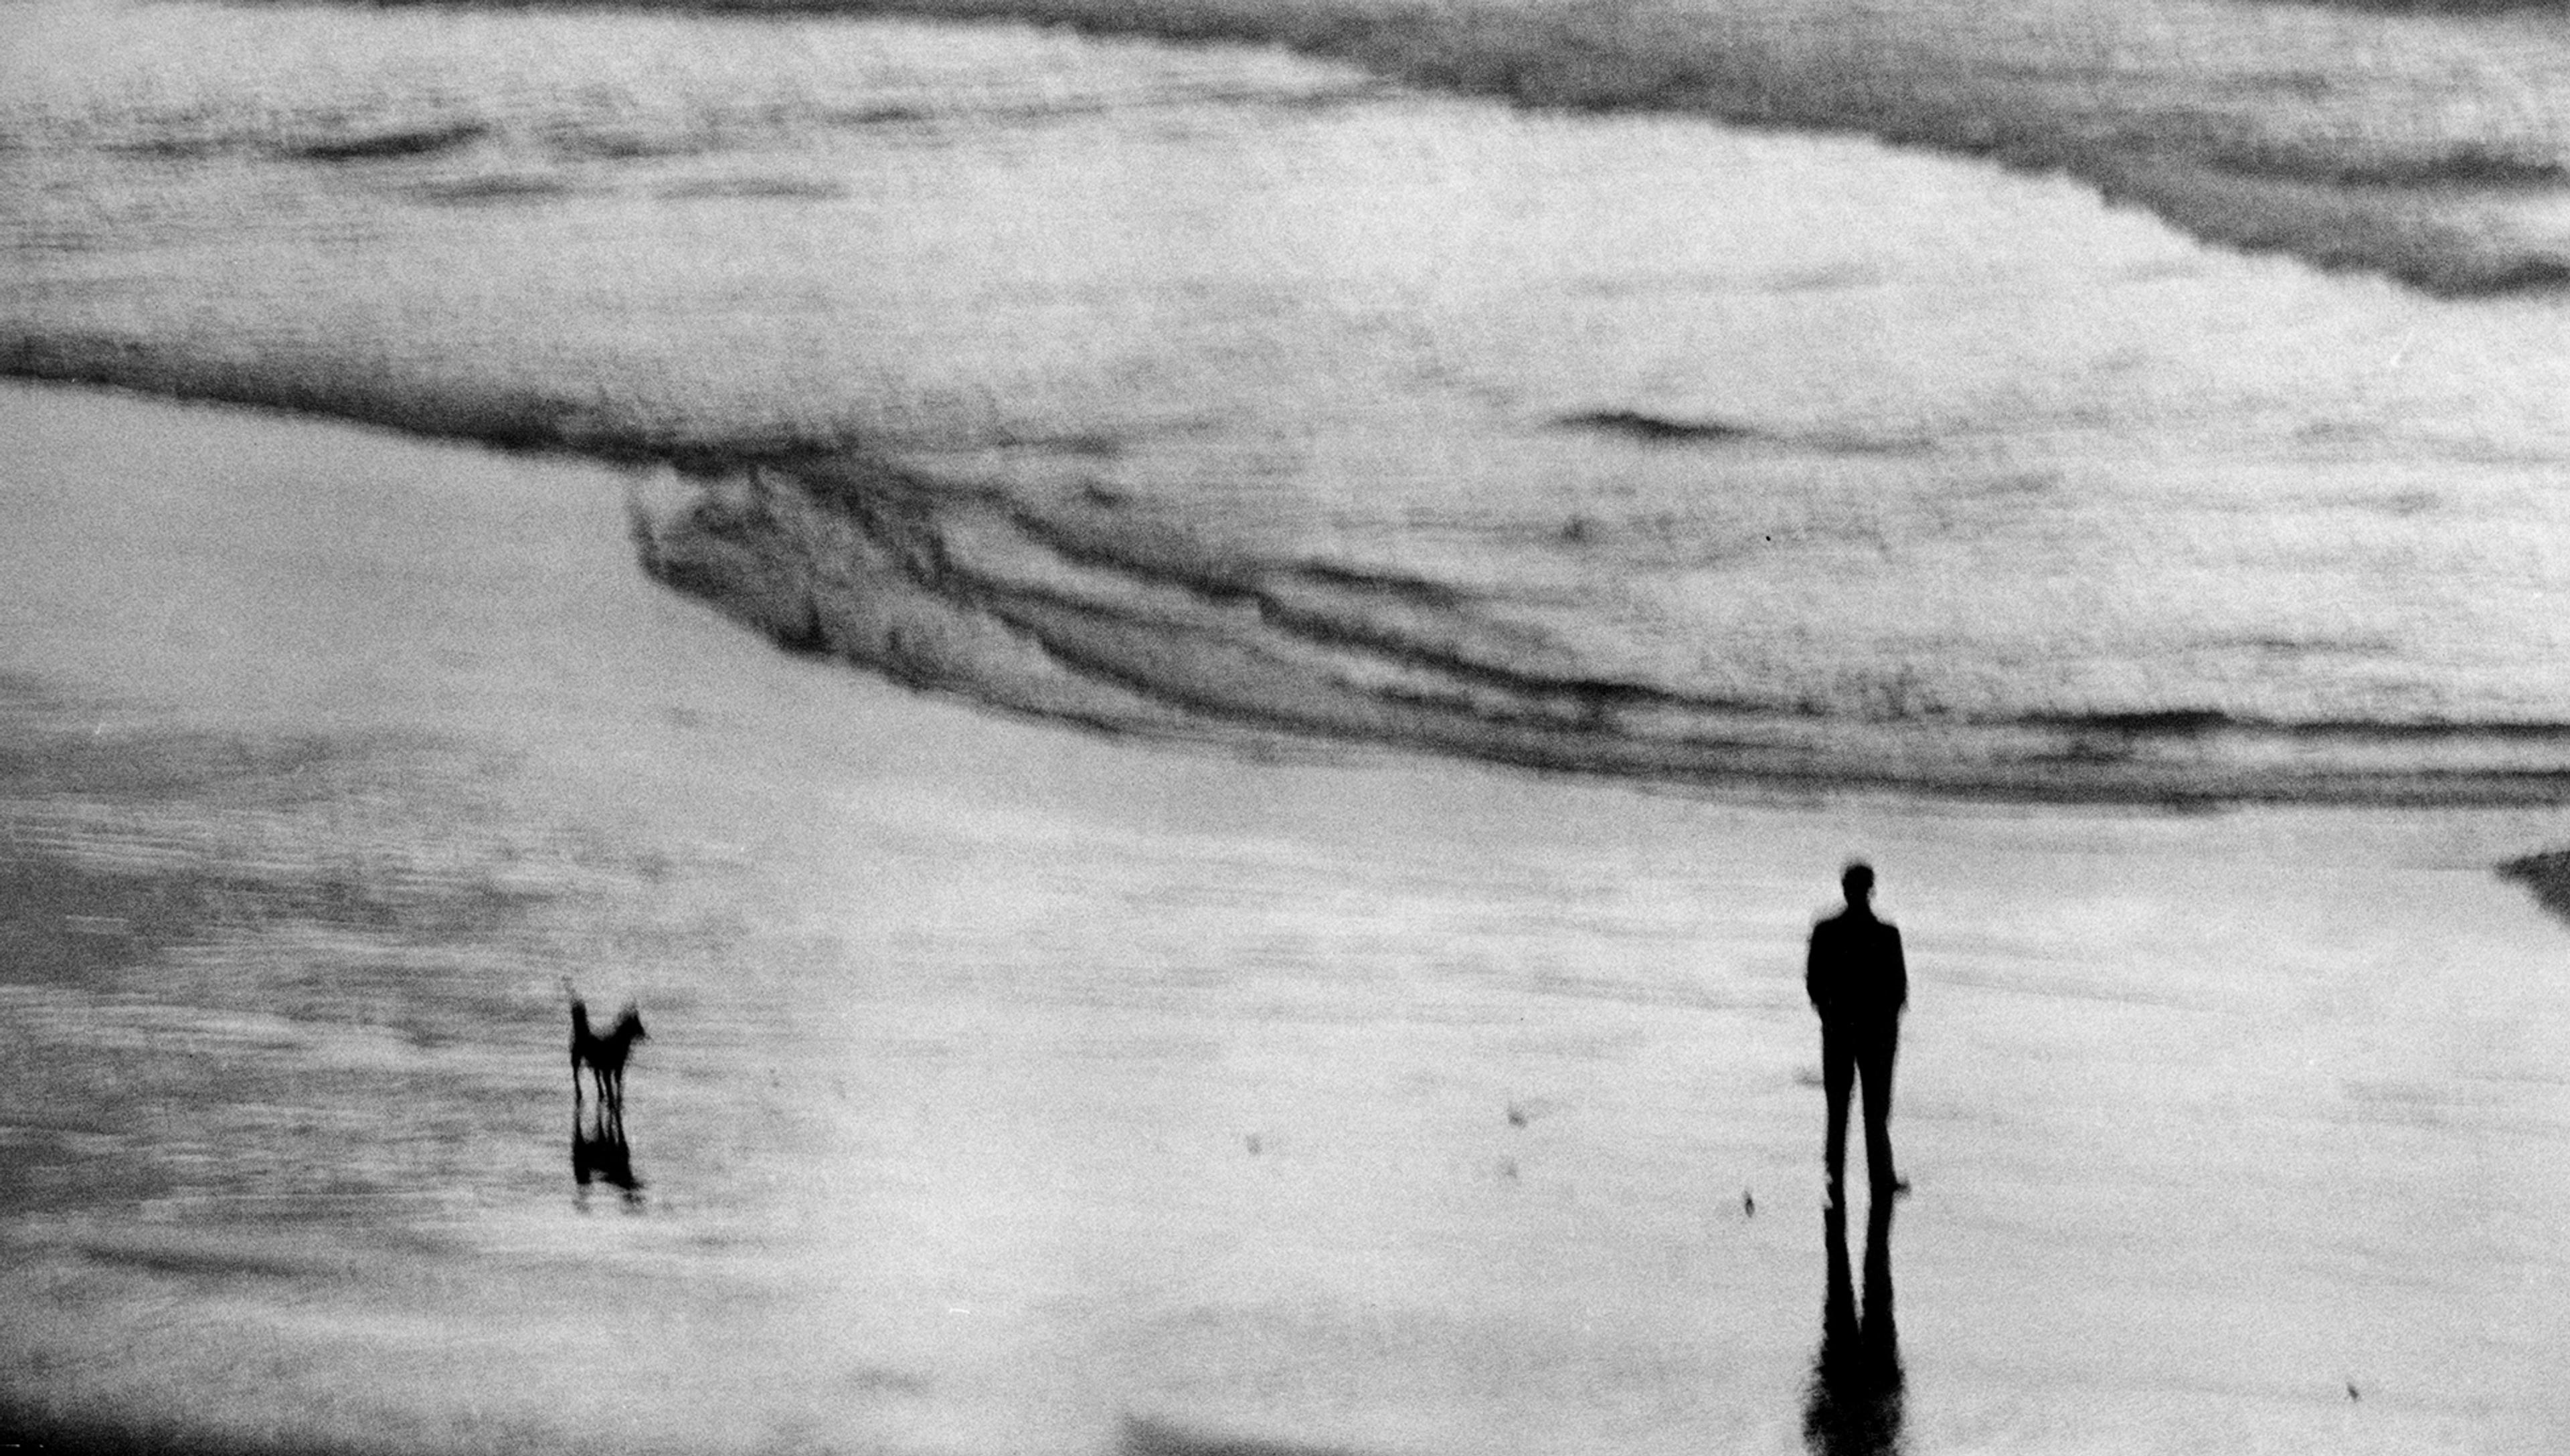 A monochrome photograph from above of a man looking out to sea. His hands are in his pockets and a dog waits some metres away